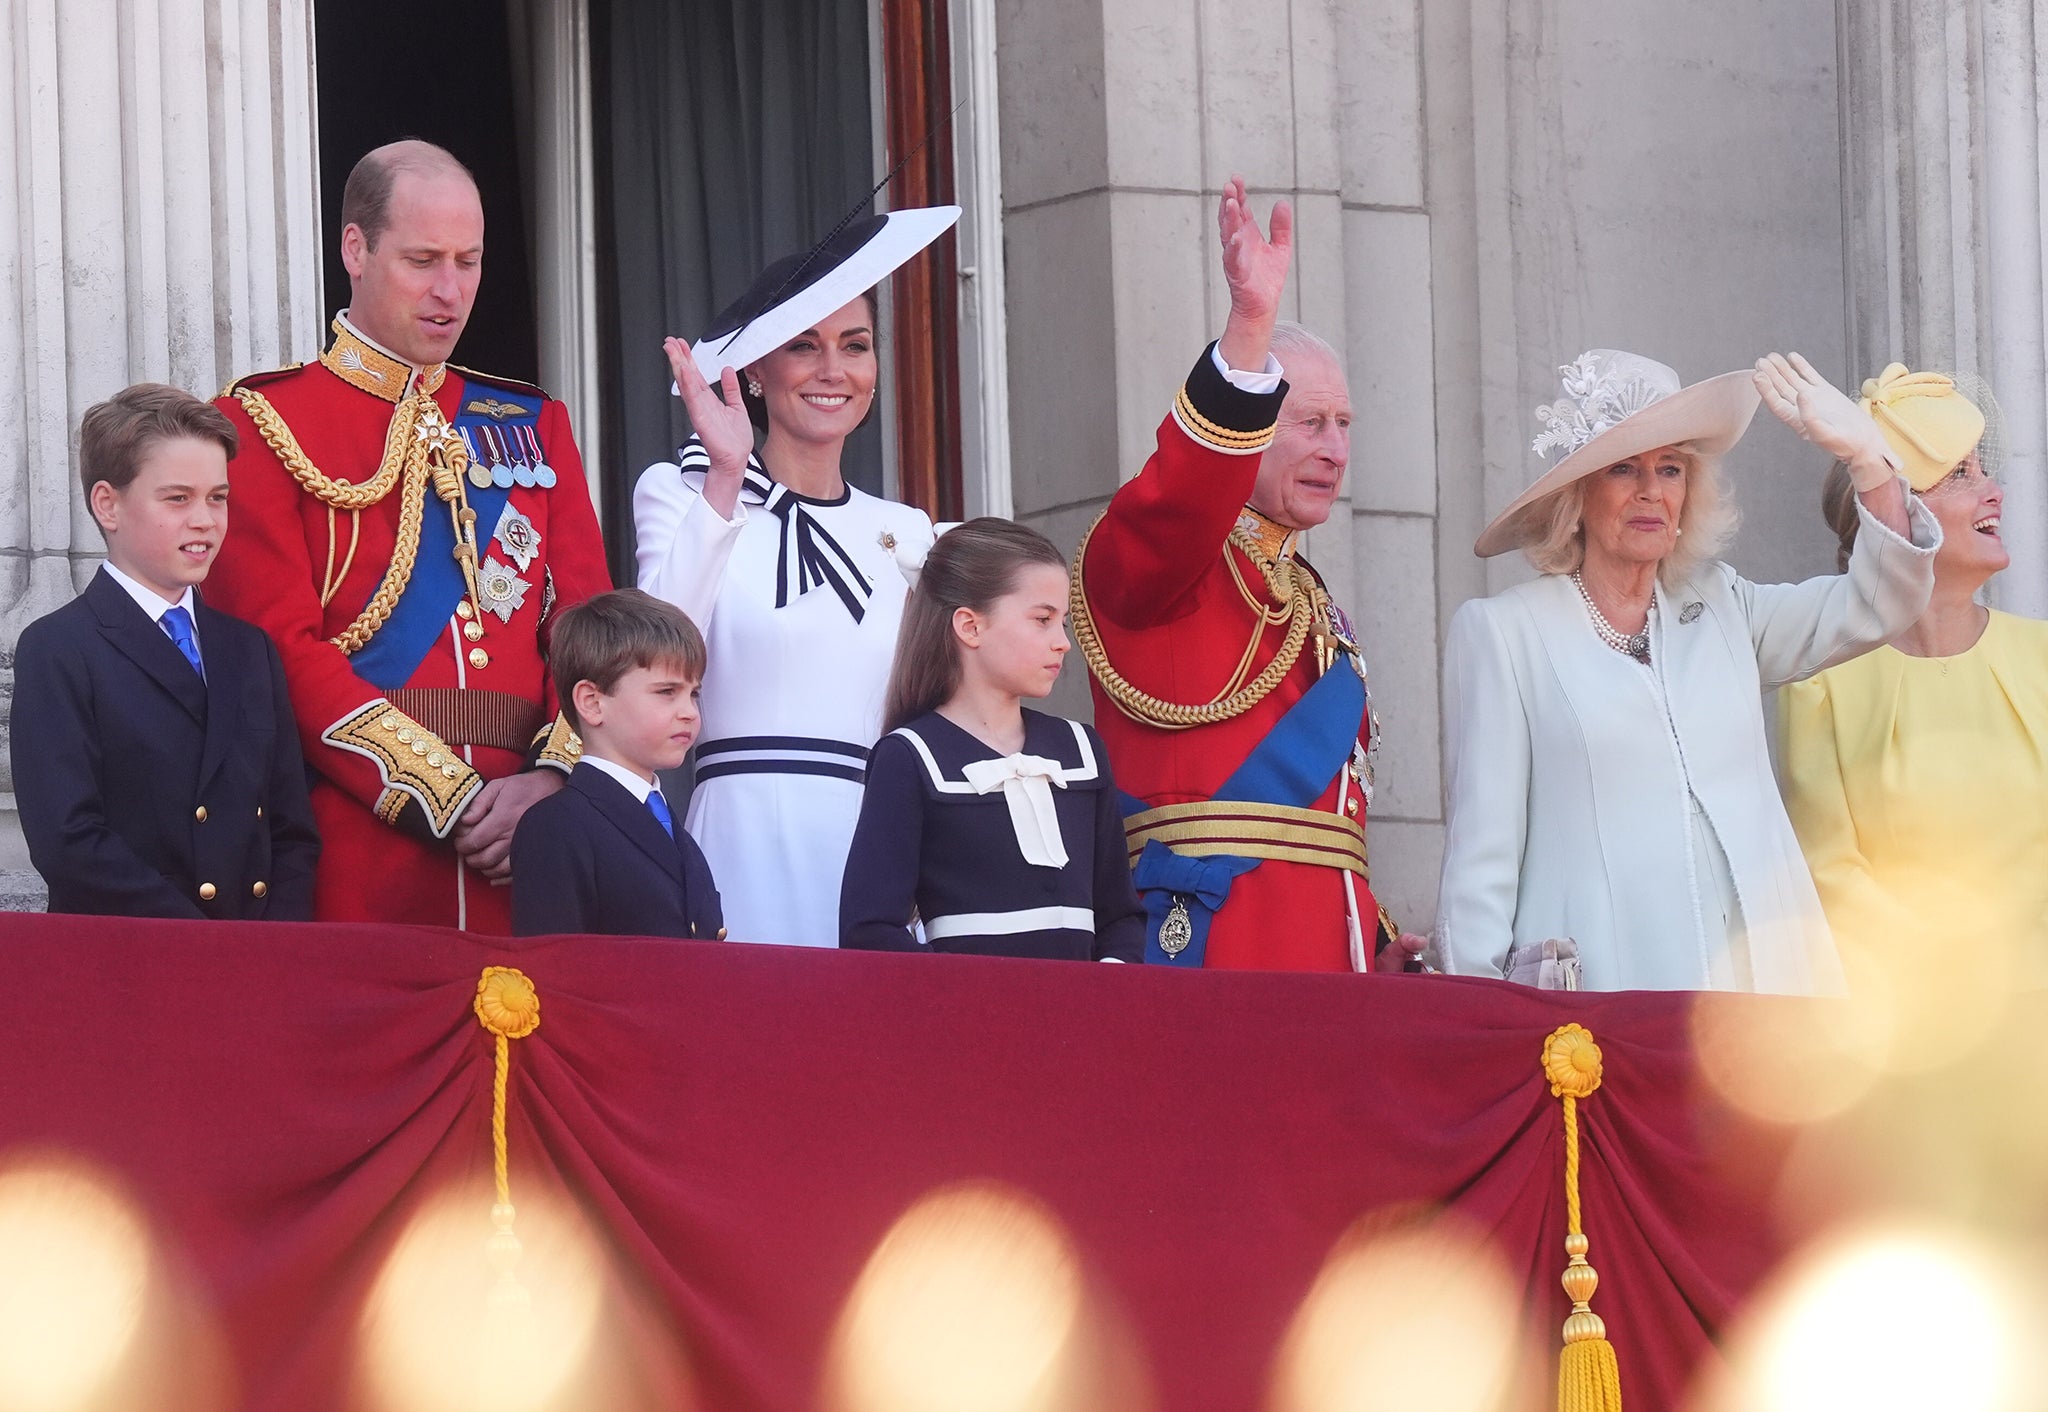 The royals wave at the crowds